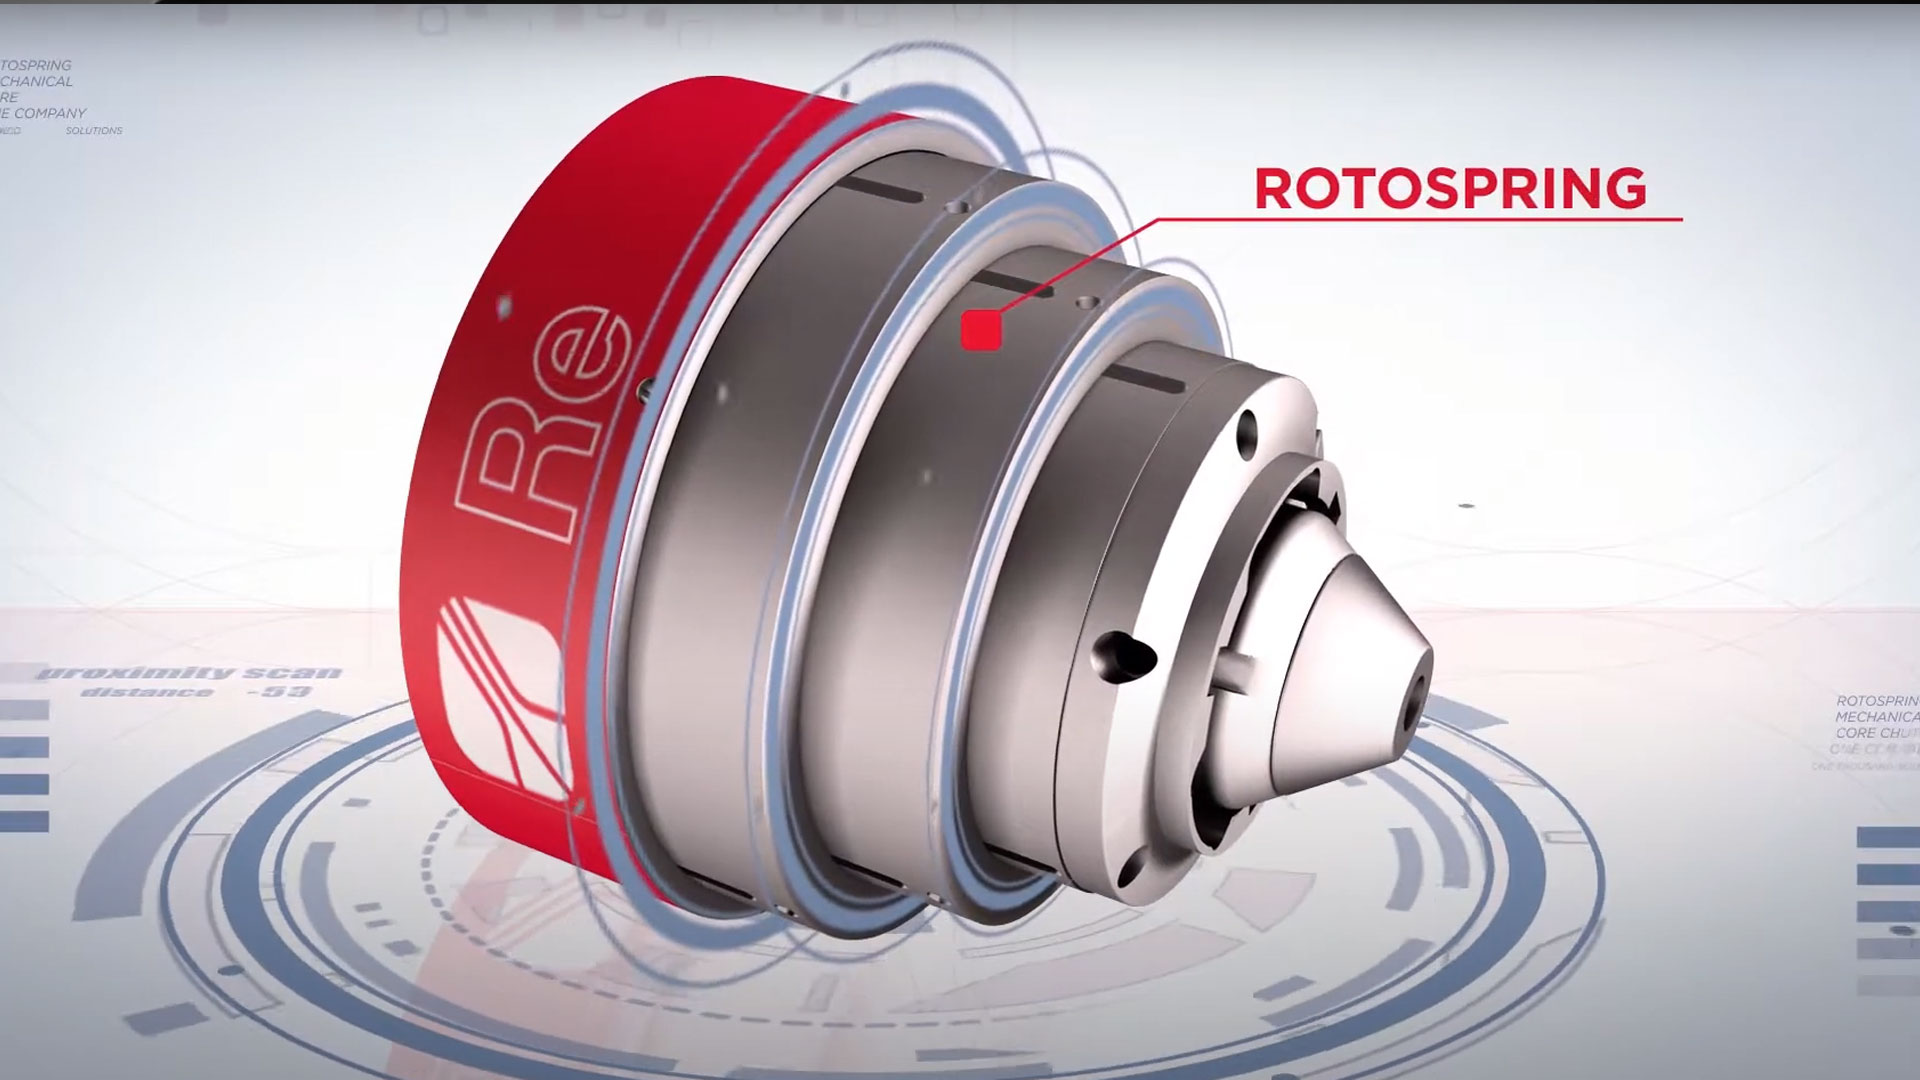 RE PRODUCT - Rotospring - Video Industriali